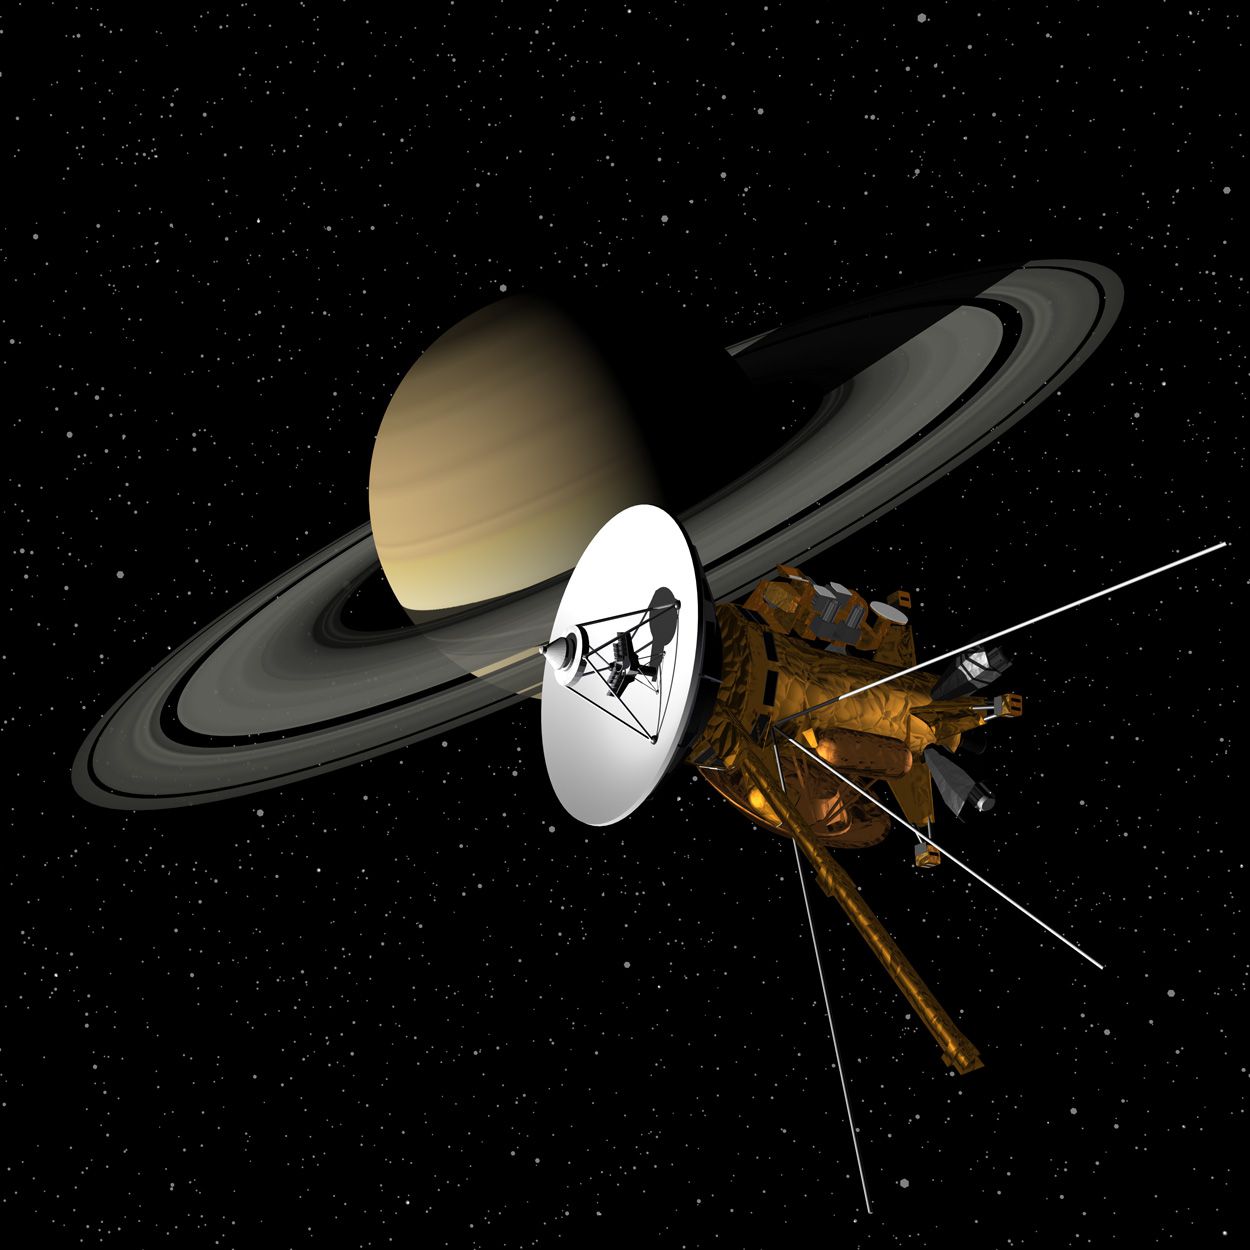 the voyager probes explored which planets